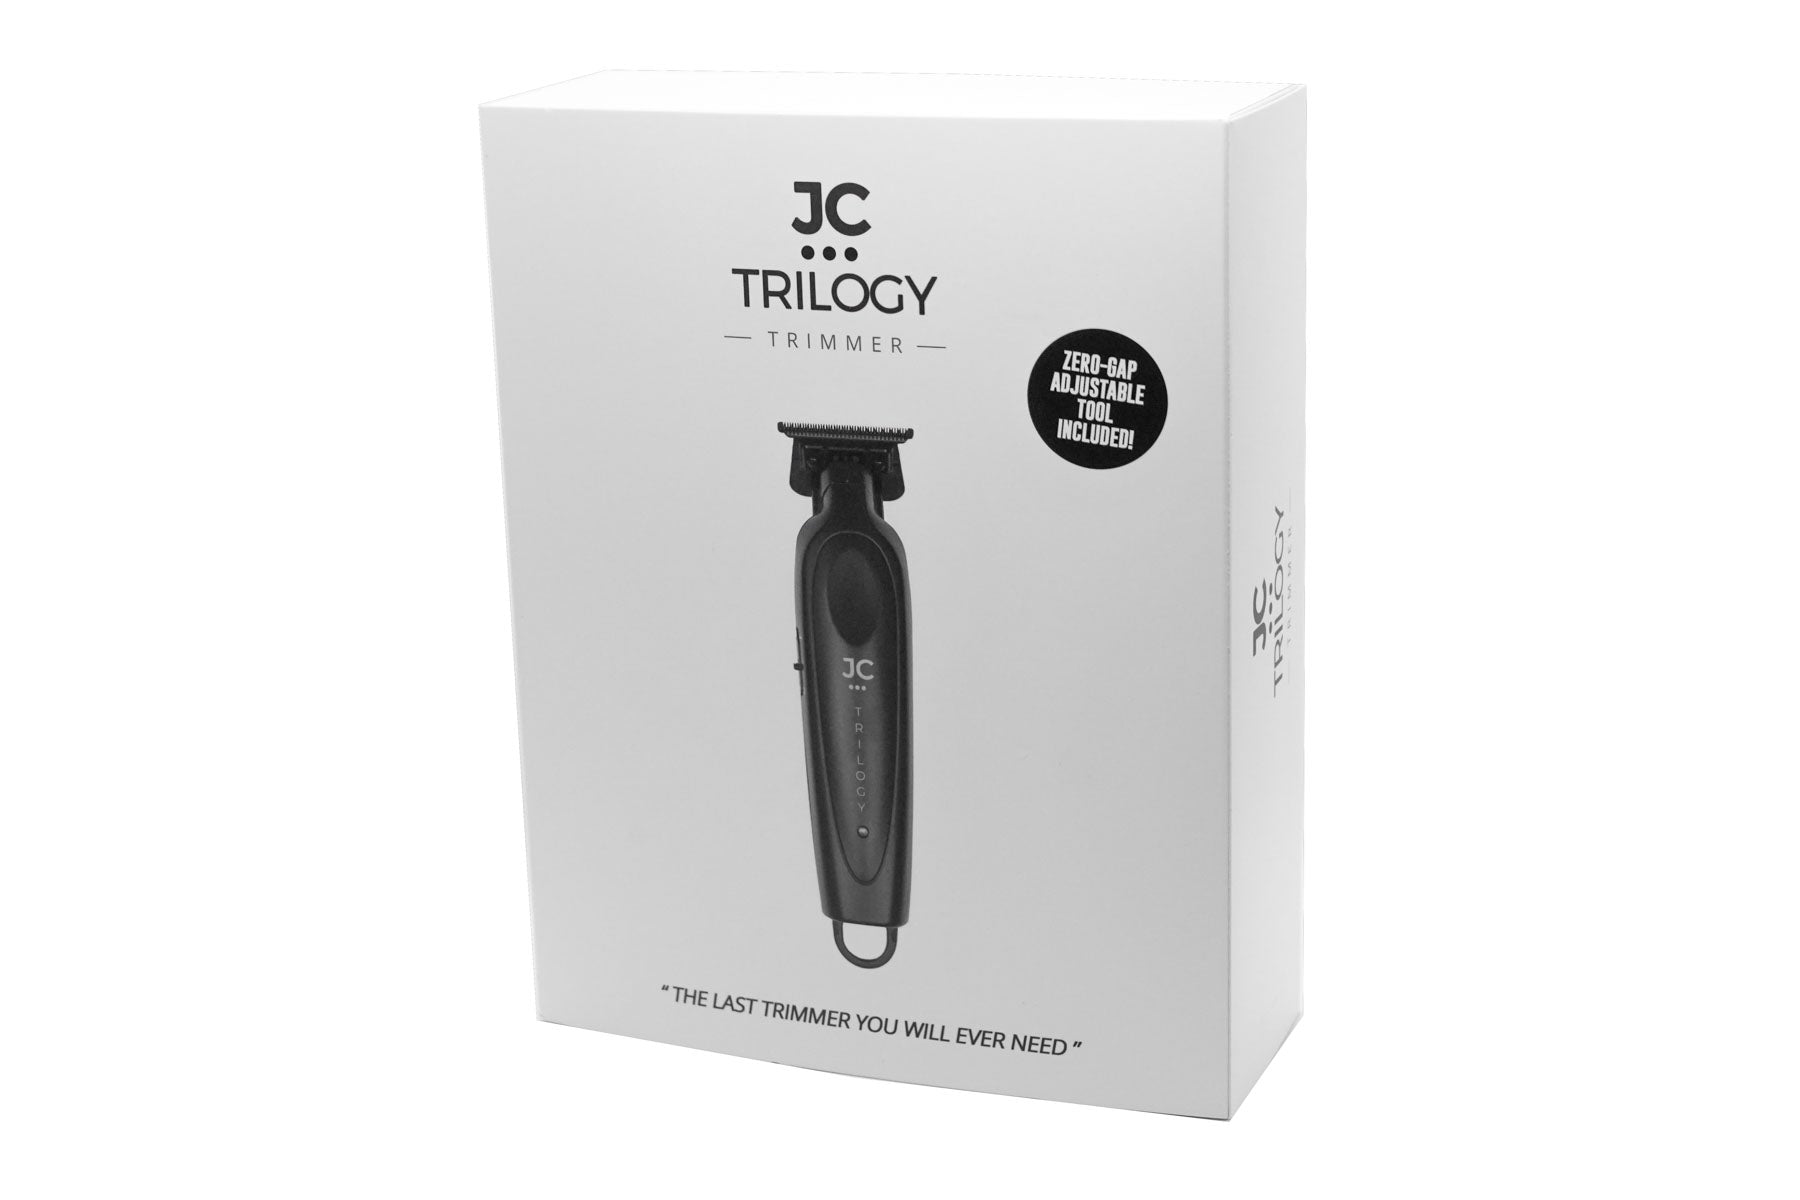 JC TRILOGY TRIMMER - Cordless Rechargeable 3+HR Runtime